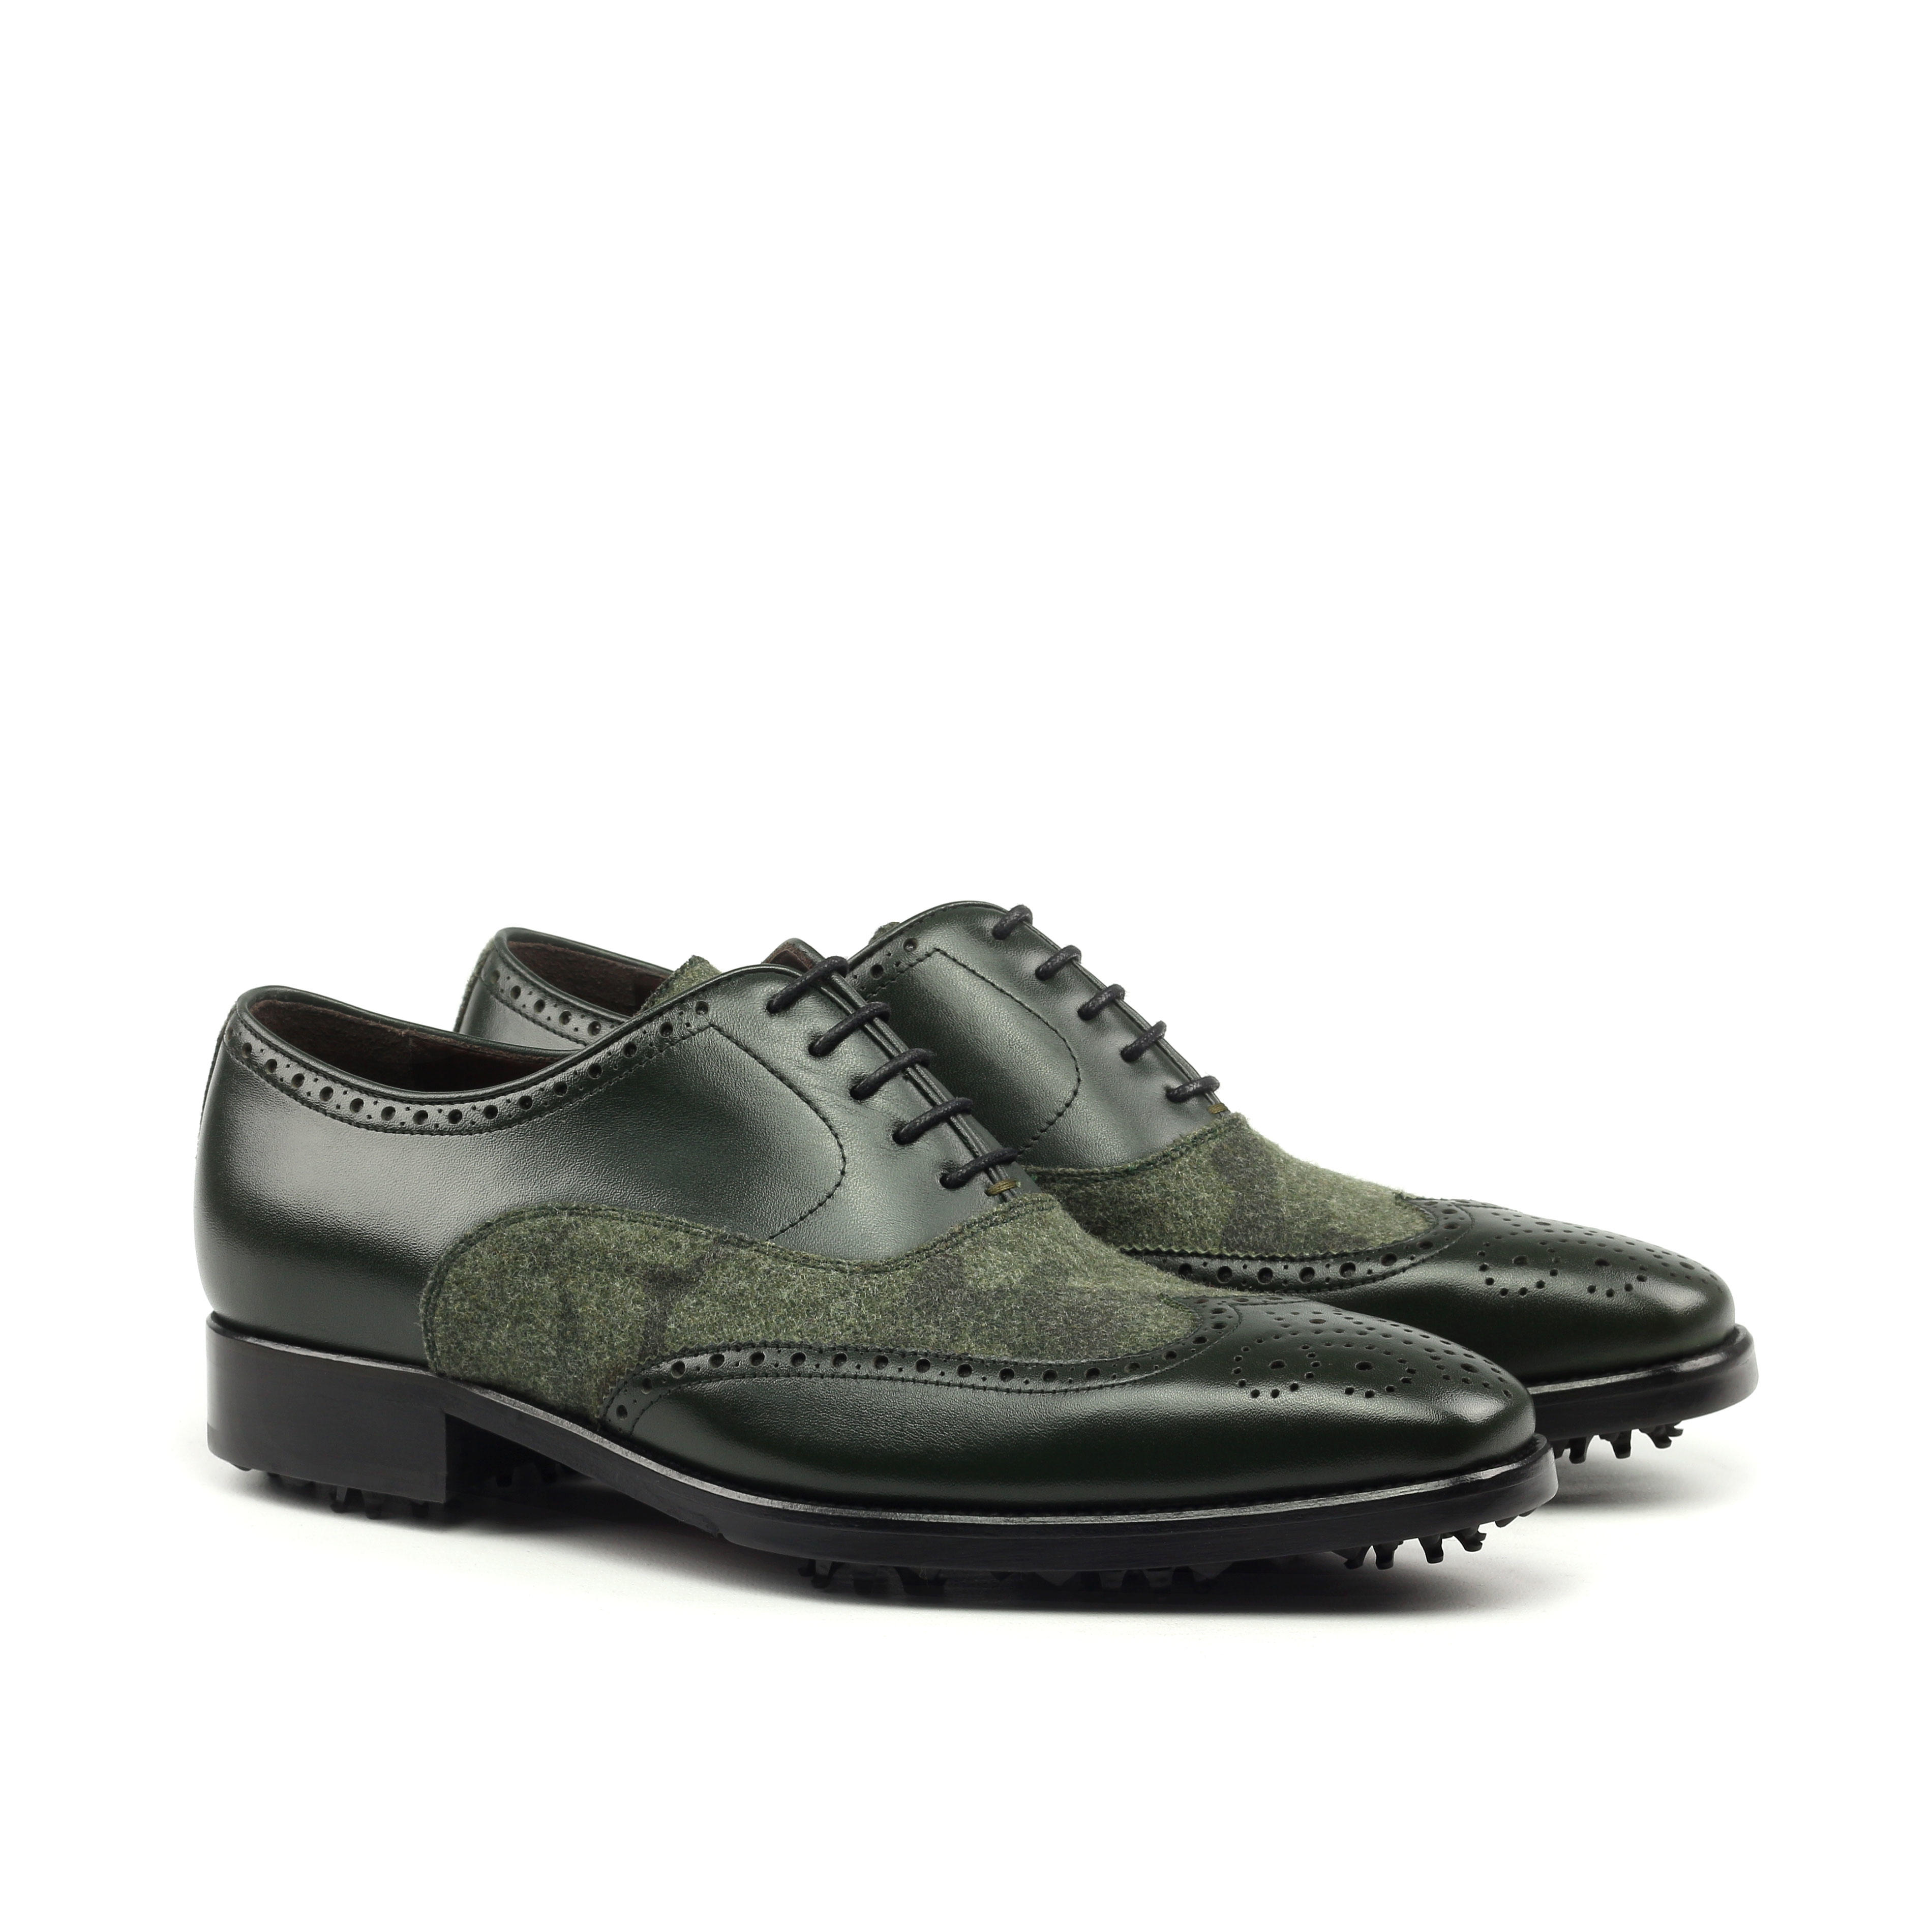 MANOR OF LONDON 'The Marylebone' Green & Camo Golfing Brogue Luxury Custom Initials Monogrammed Front Side View